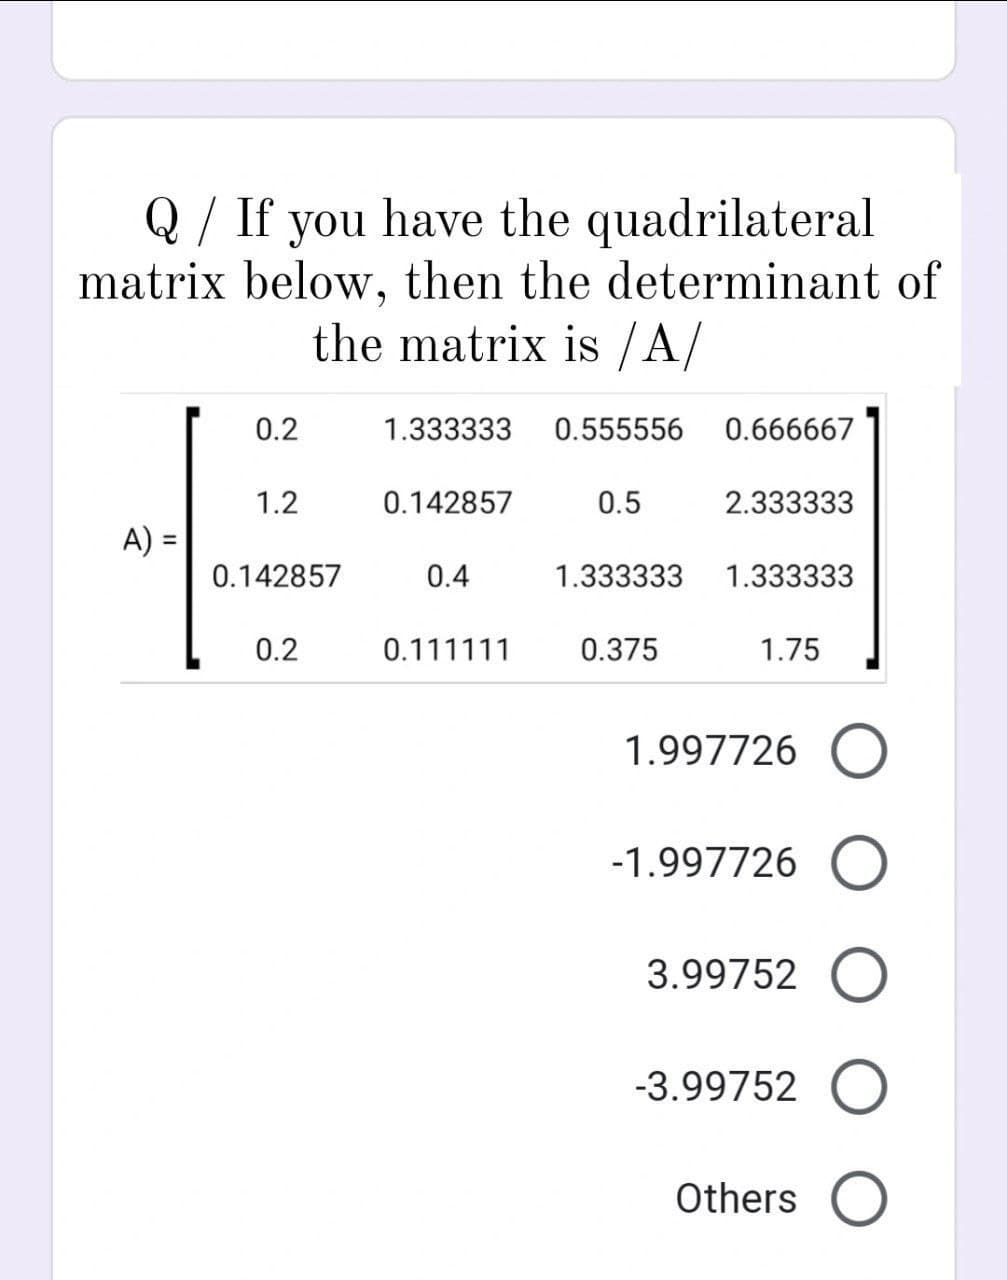 /
Q If you have the quadrilateral
matrix below, then the determinant of
the matrix is /A/
A) =
0.2
1.2
0.142857
0.2
1.333333 0.555556 0.666667
0.142857
0.4
0.111111
0.5
2.333333
1.333333 1.333333
0.375
1.75
1.997726 O
-1.997726 O
3.99752 O
-3.99752 O
Others O